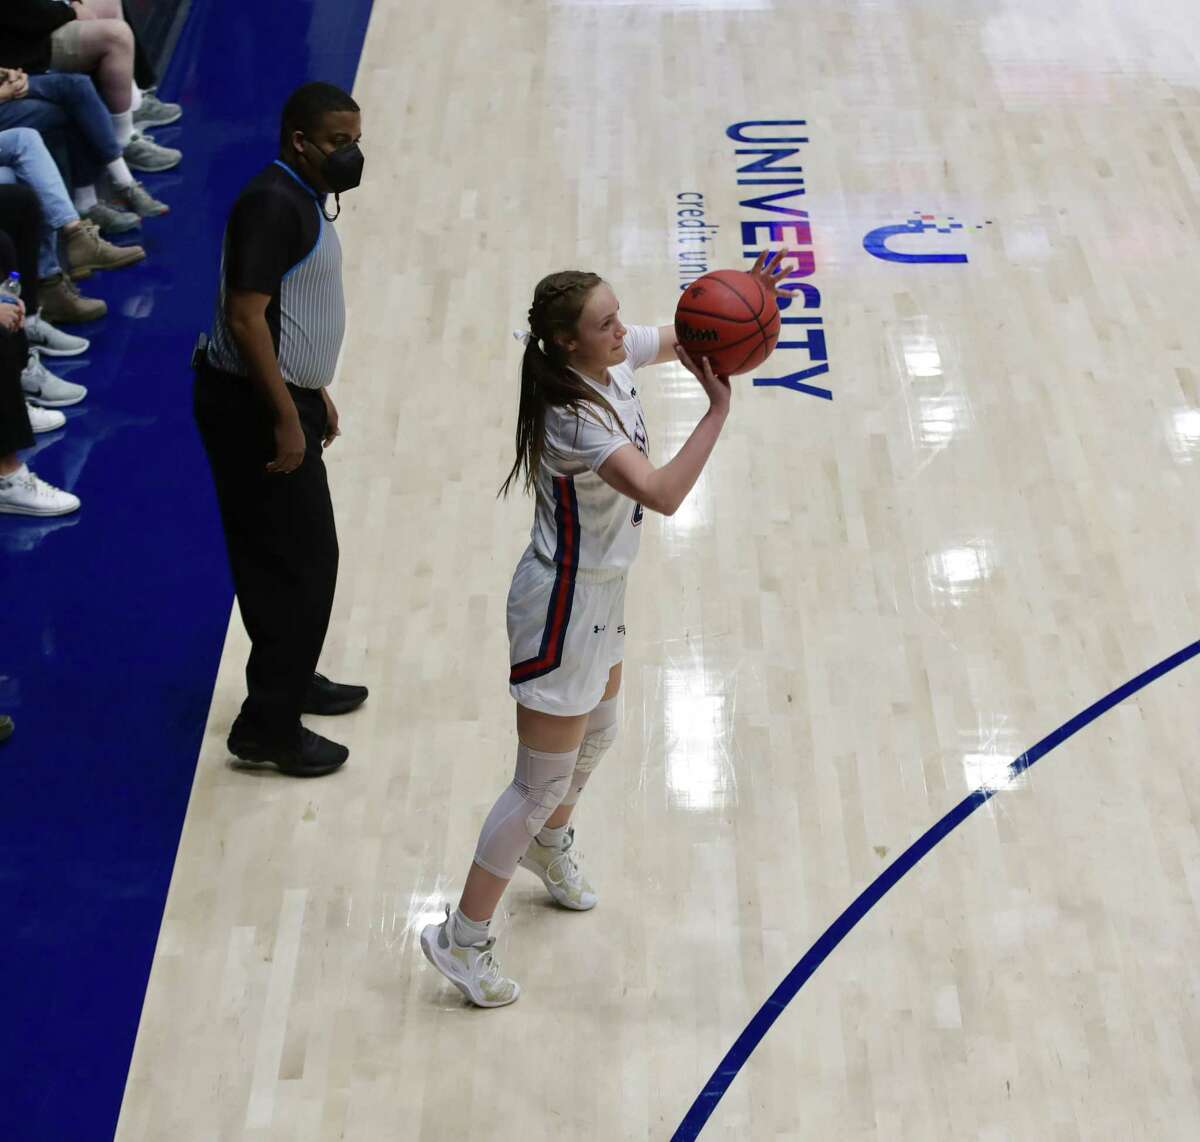 St. Mary’s Taycee Wedin became the West Coast Conference’s career leader for 3-pointers.